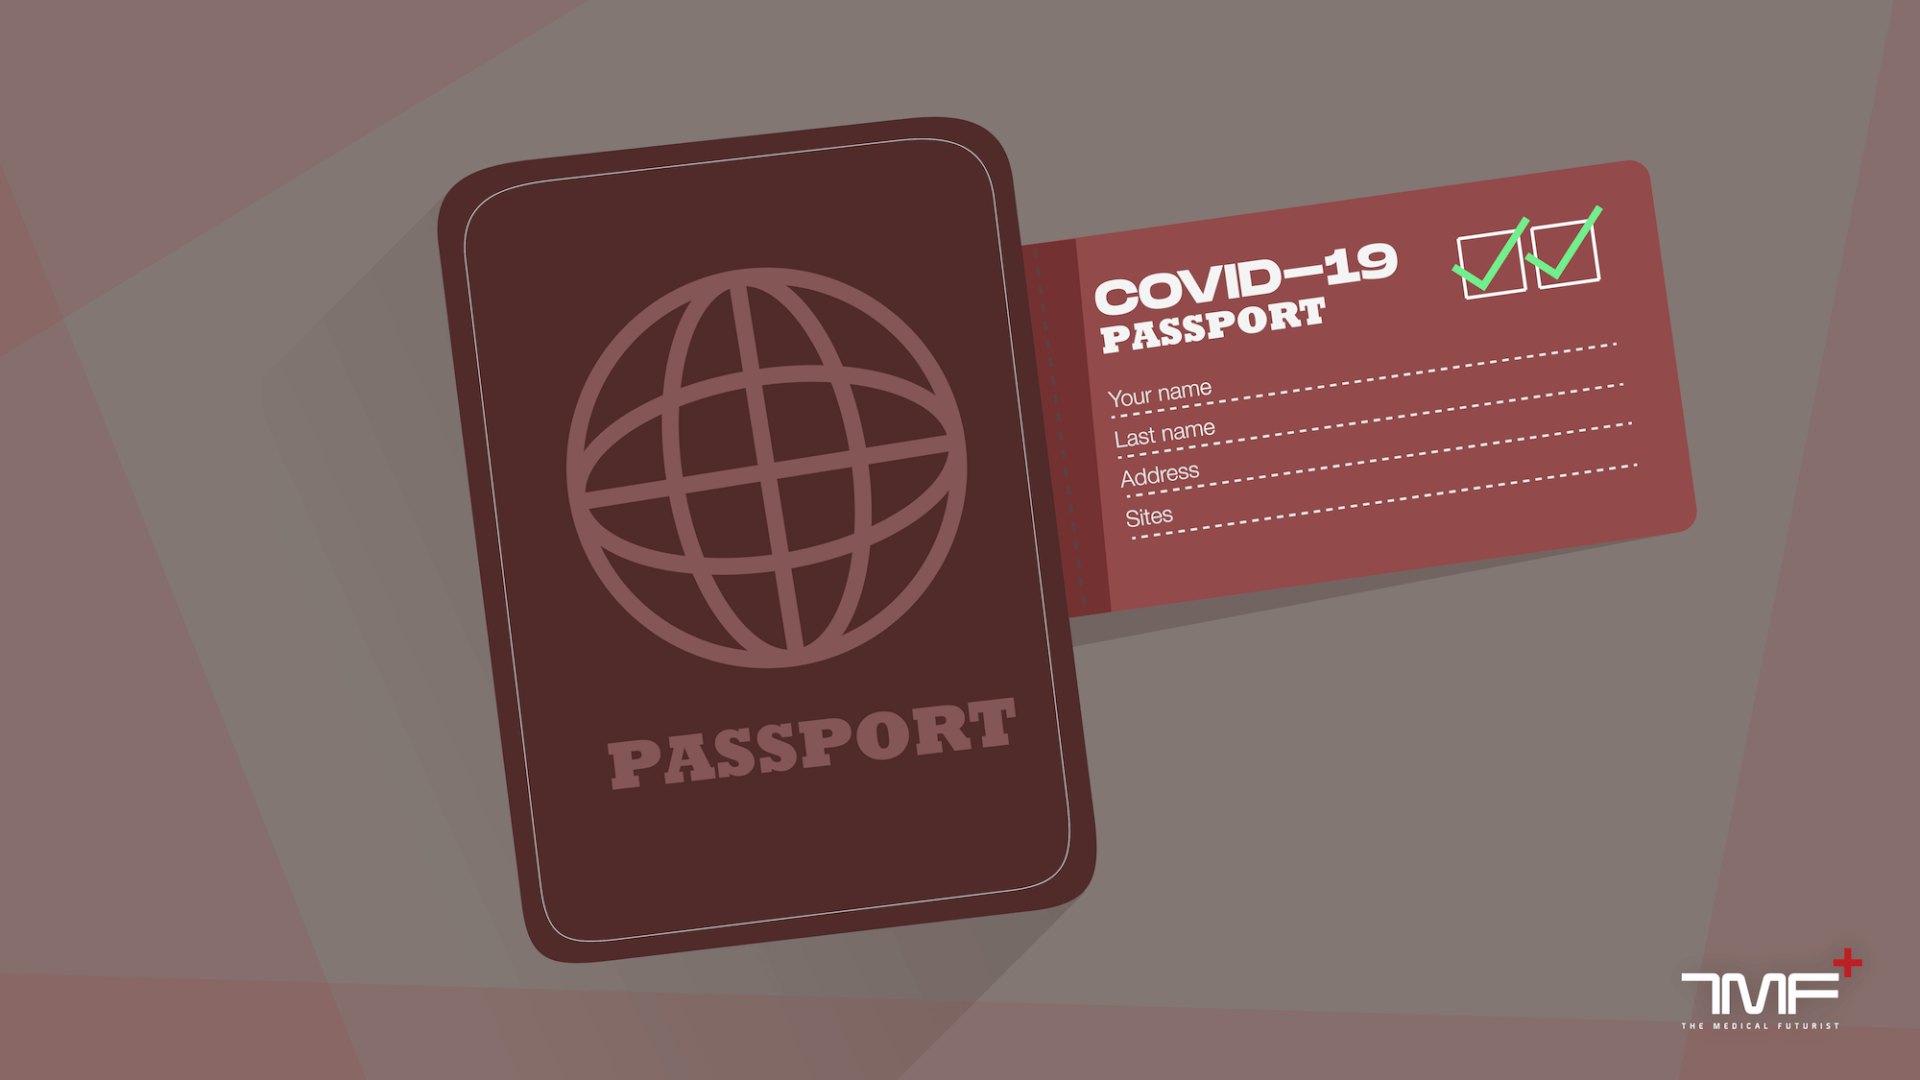 An Immunity Passport After COVID-19 And How Digital Health Can Support It